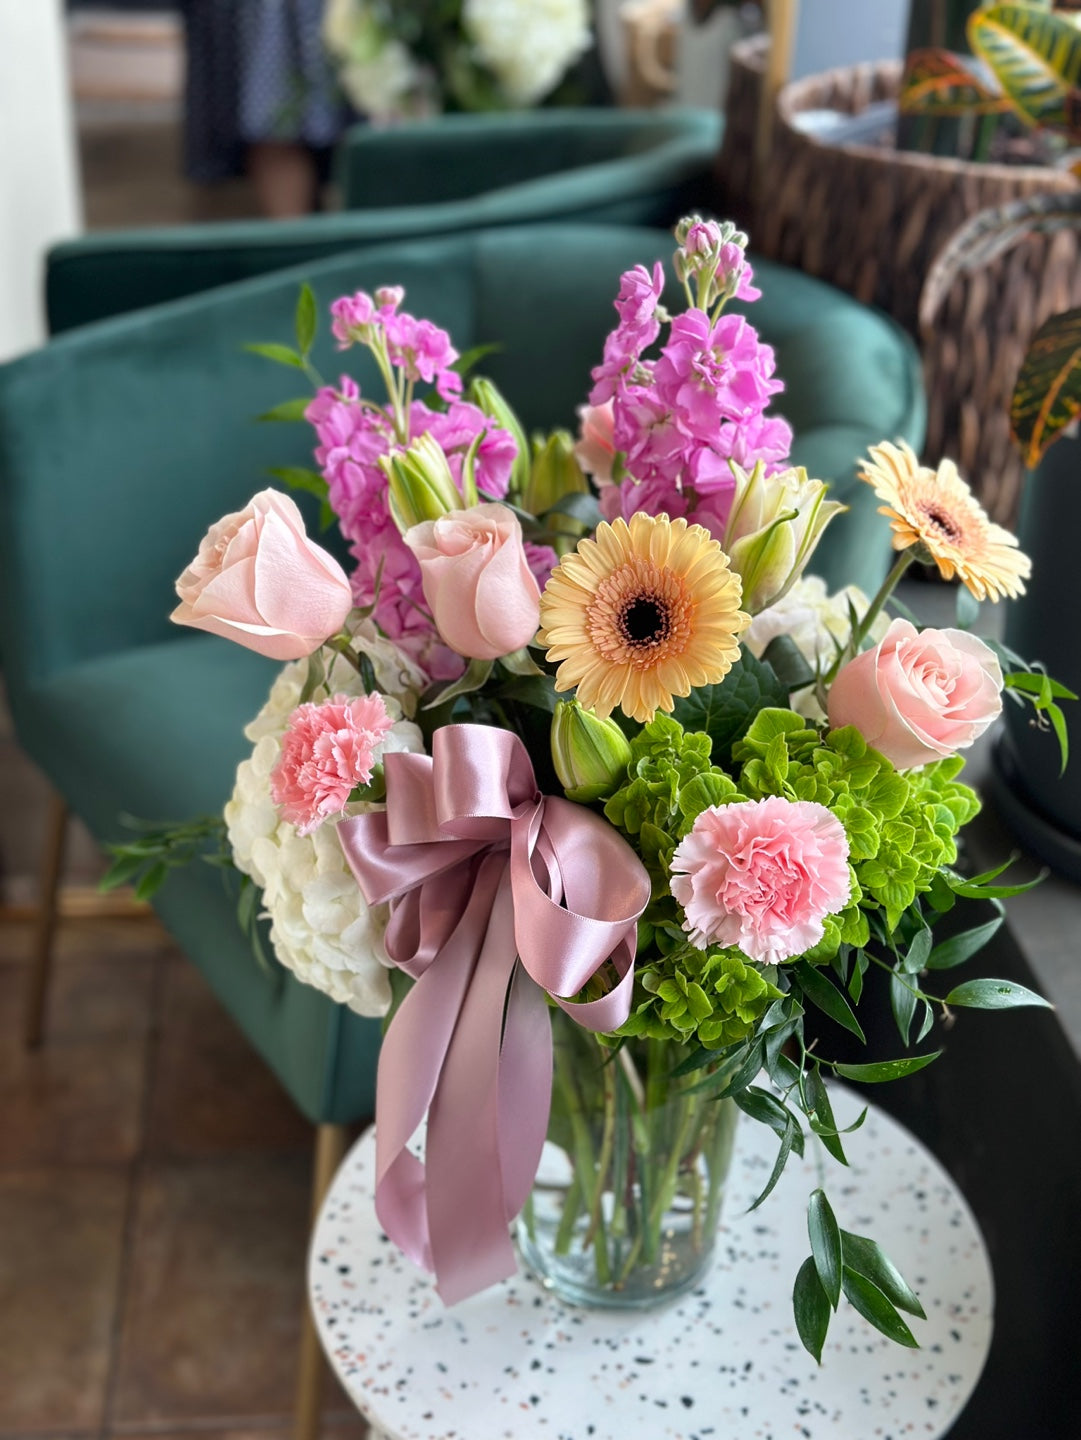 Flower Delivery Toronto | Moon's Flowers – Same Day Flower Delivery ...